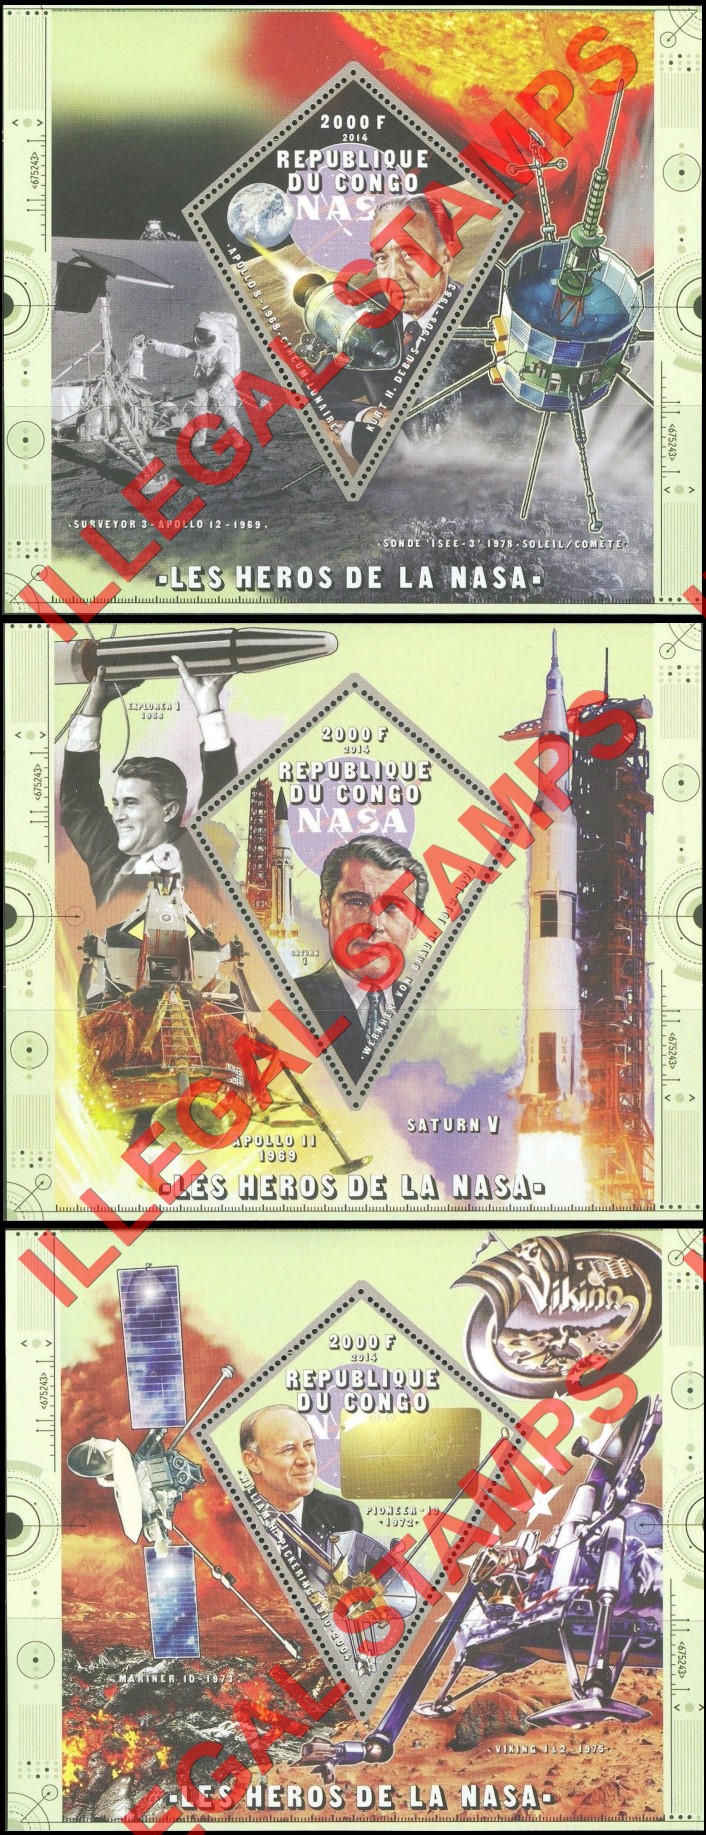 Congo Republic 2014 Heroes of NASA Illegal Stamp Souvenir Sheets of 1 (Part 5)